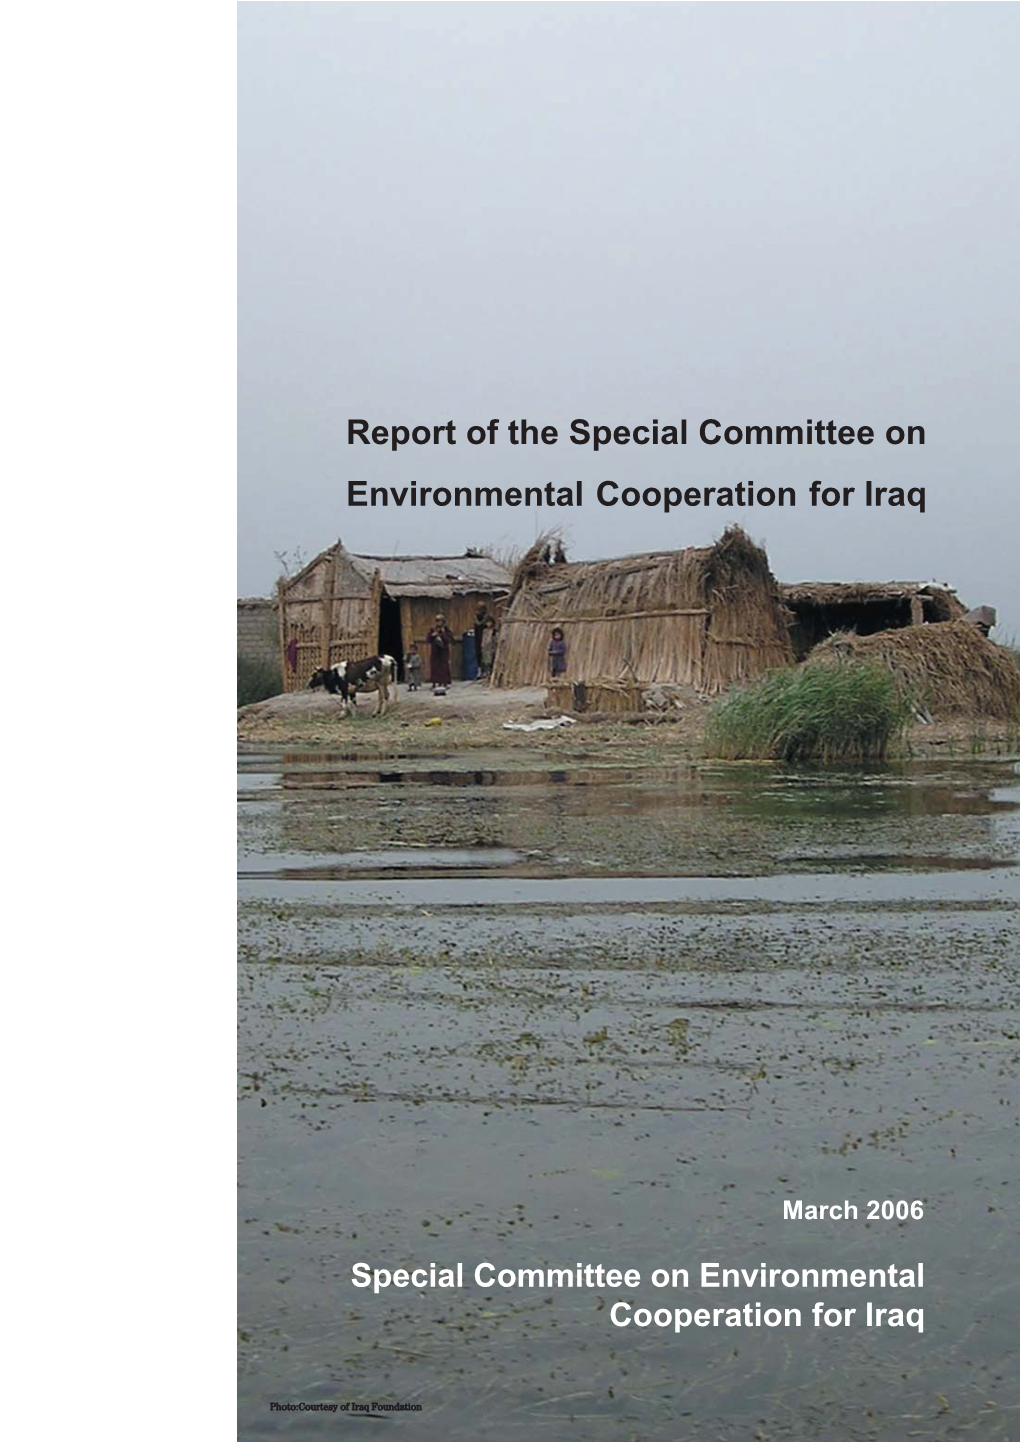 Report of the Special Committee on Environmental Cooperation Foe Iraq